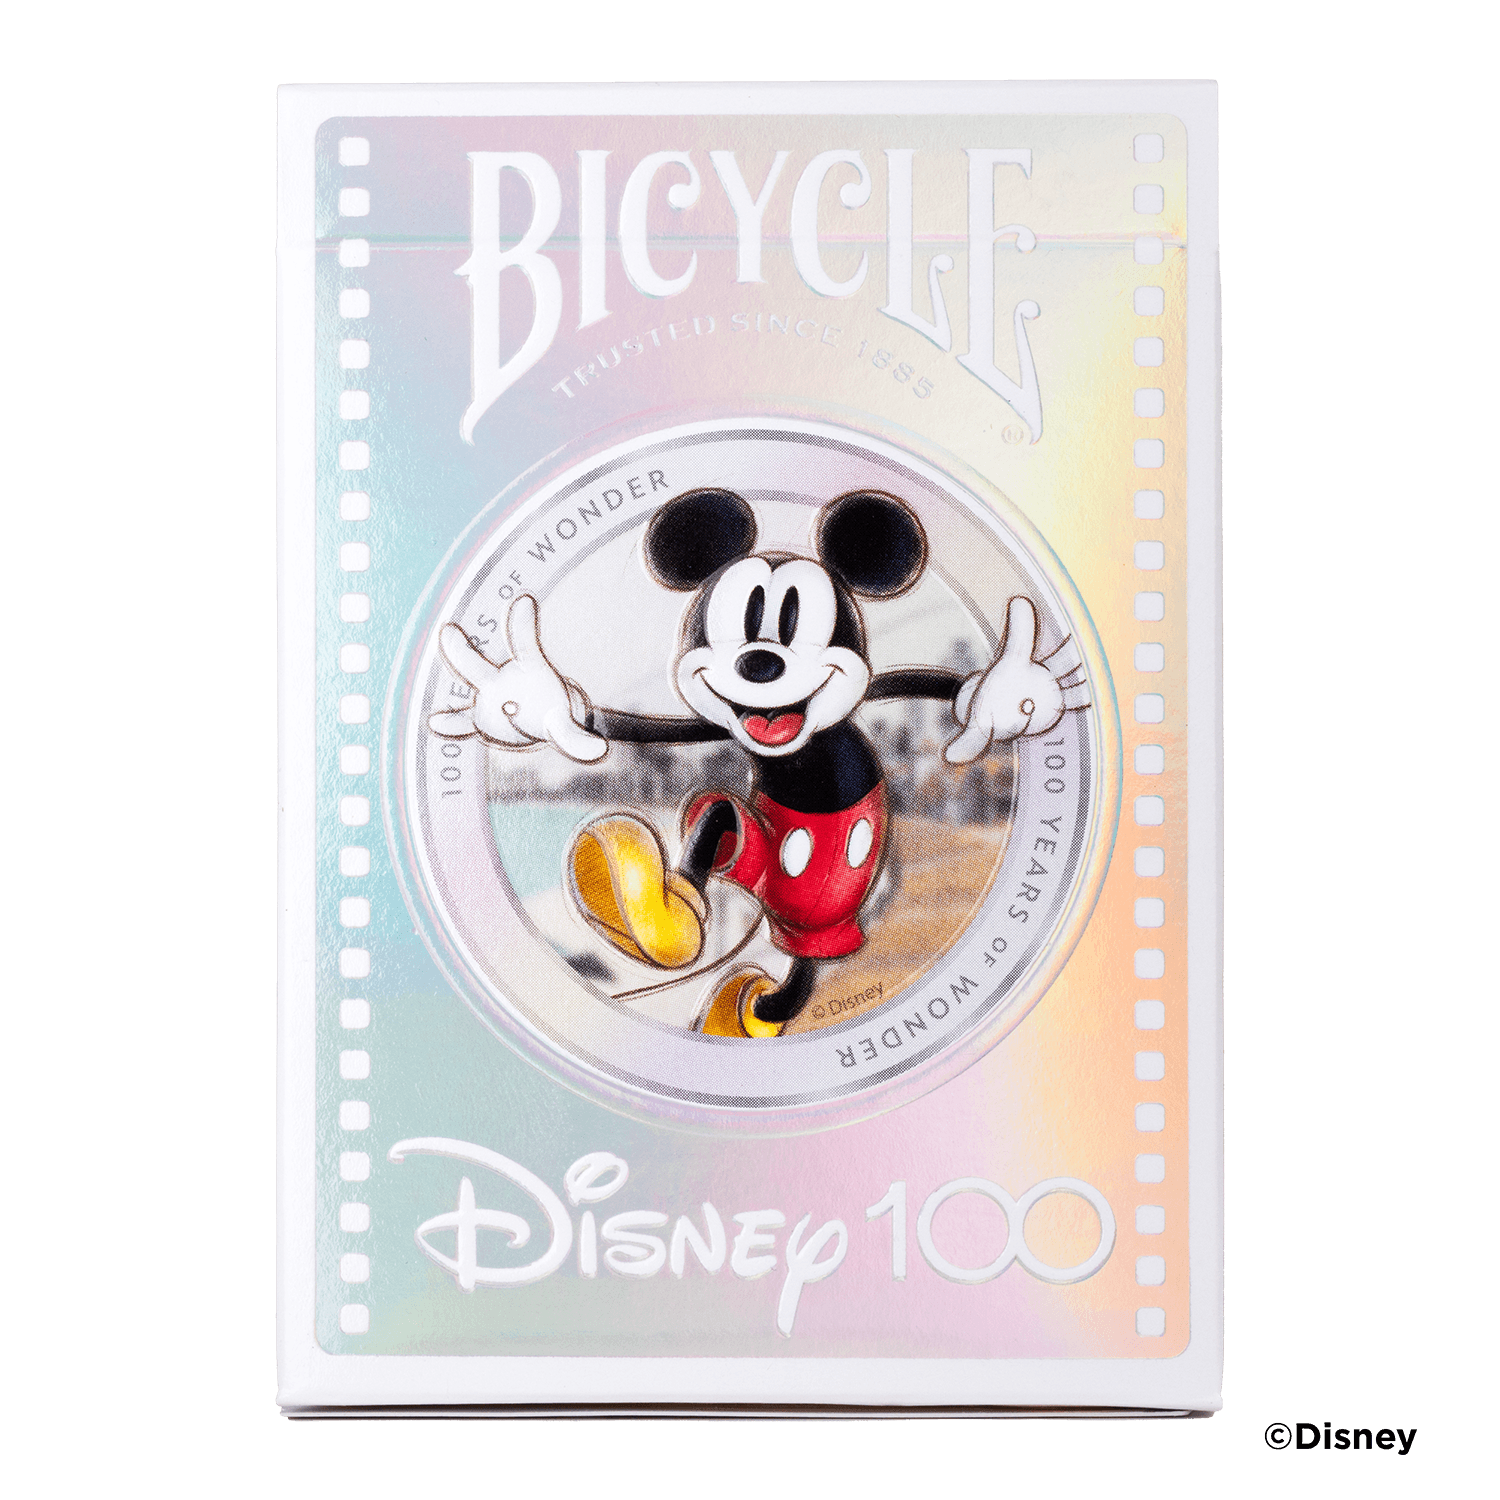 Bicycle Disney 100 Playing Cards-United States Playing Cards Company-Ace Cards & Collectibles